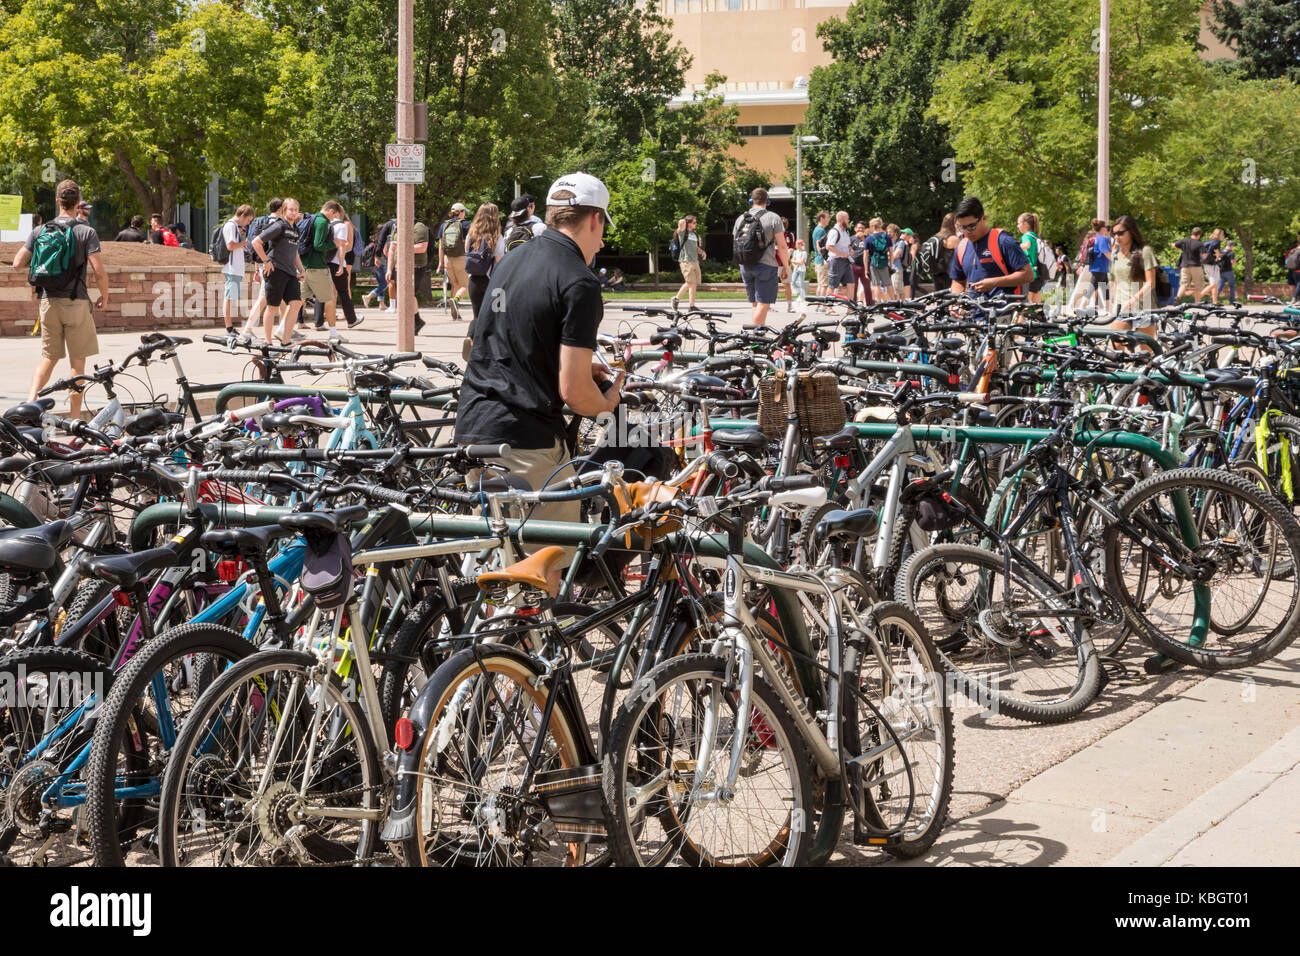 Fort Collins, Colorado - Bicycles parked on the campus of Colorado State University. Bicycles are an extremely popular form of transportation on campu Stock Photo